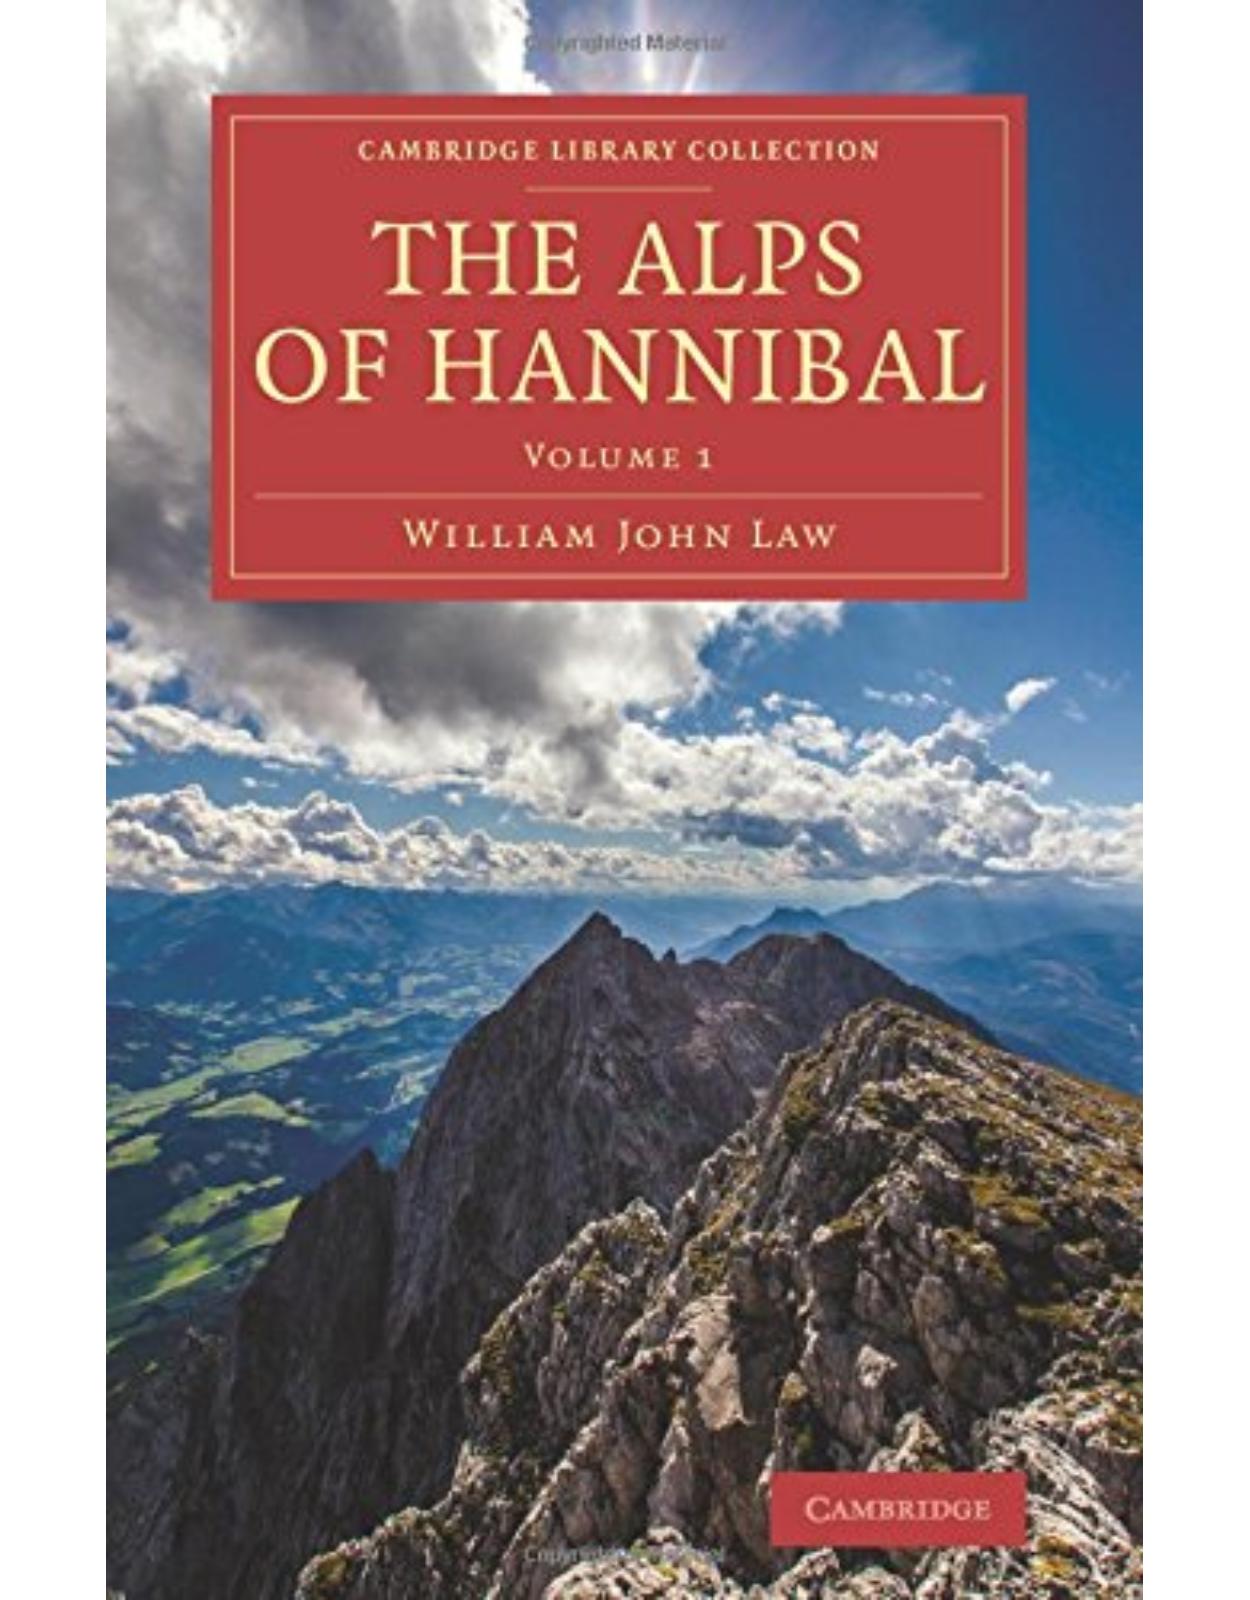 The Alps of Hannibal: Volume 2 (Cambridge Library Collection - Classics